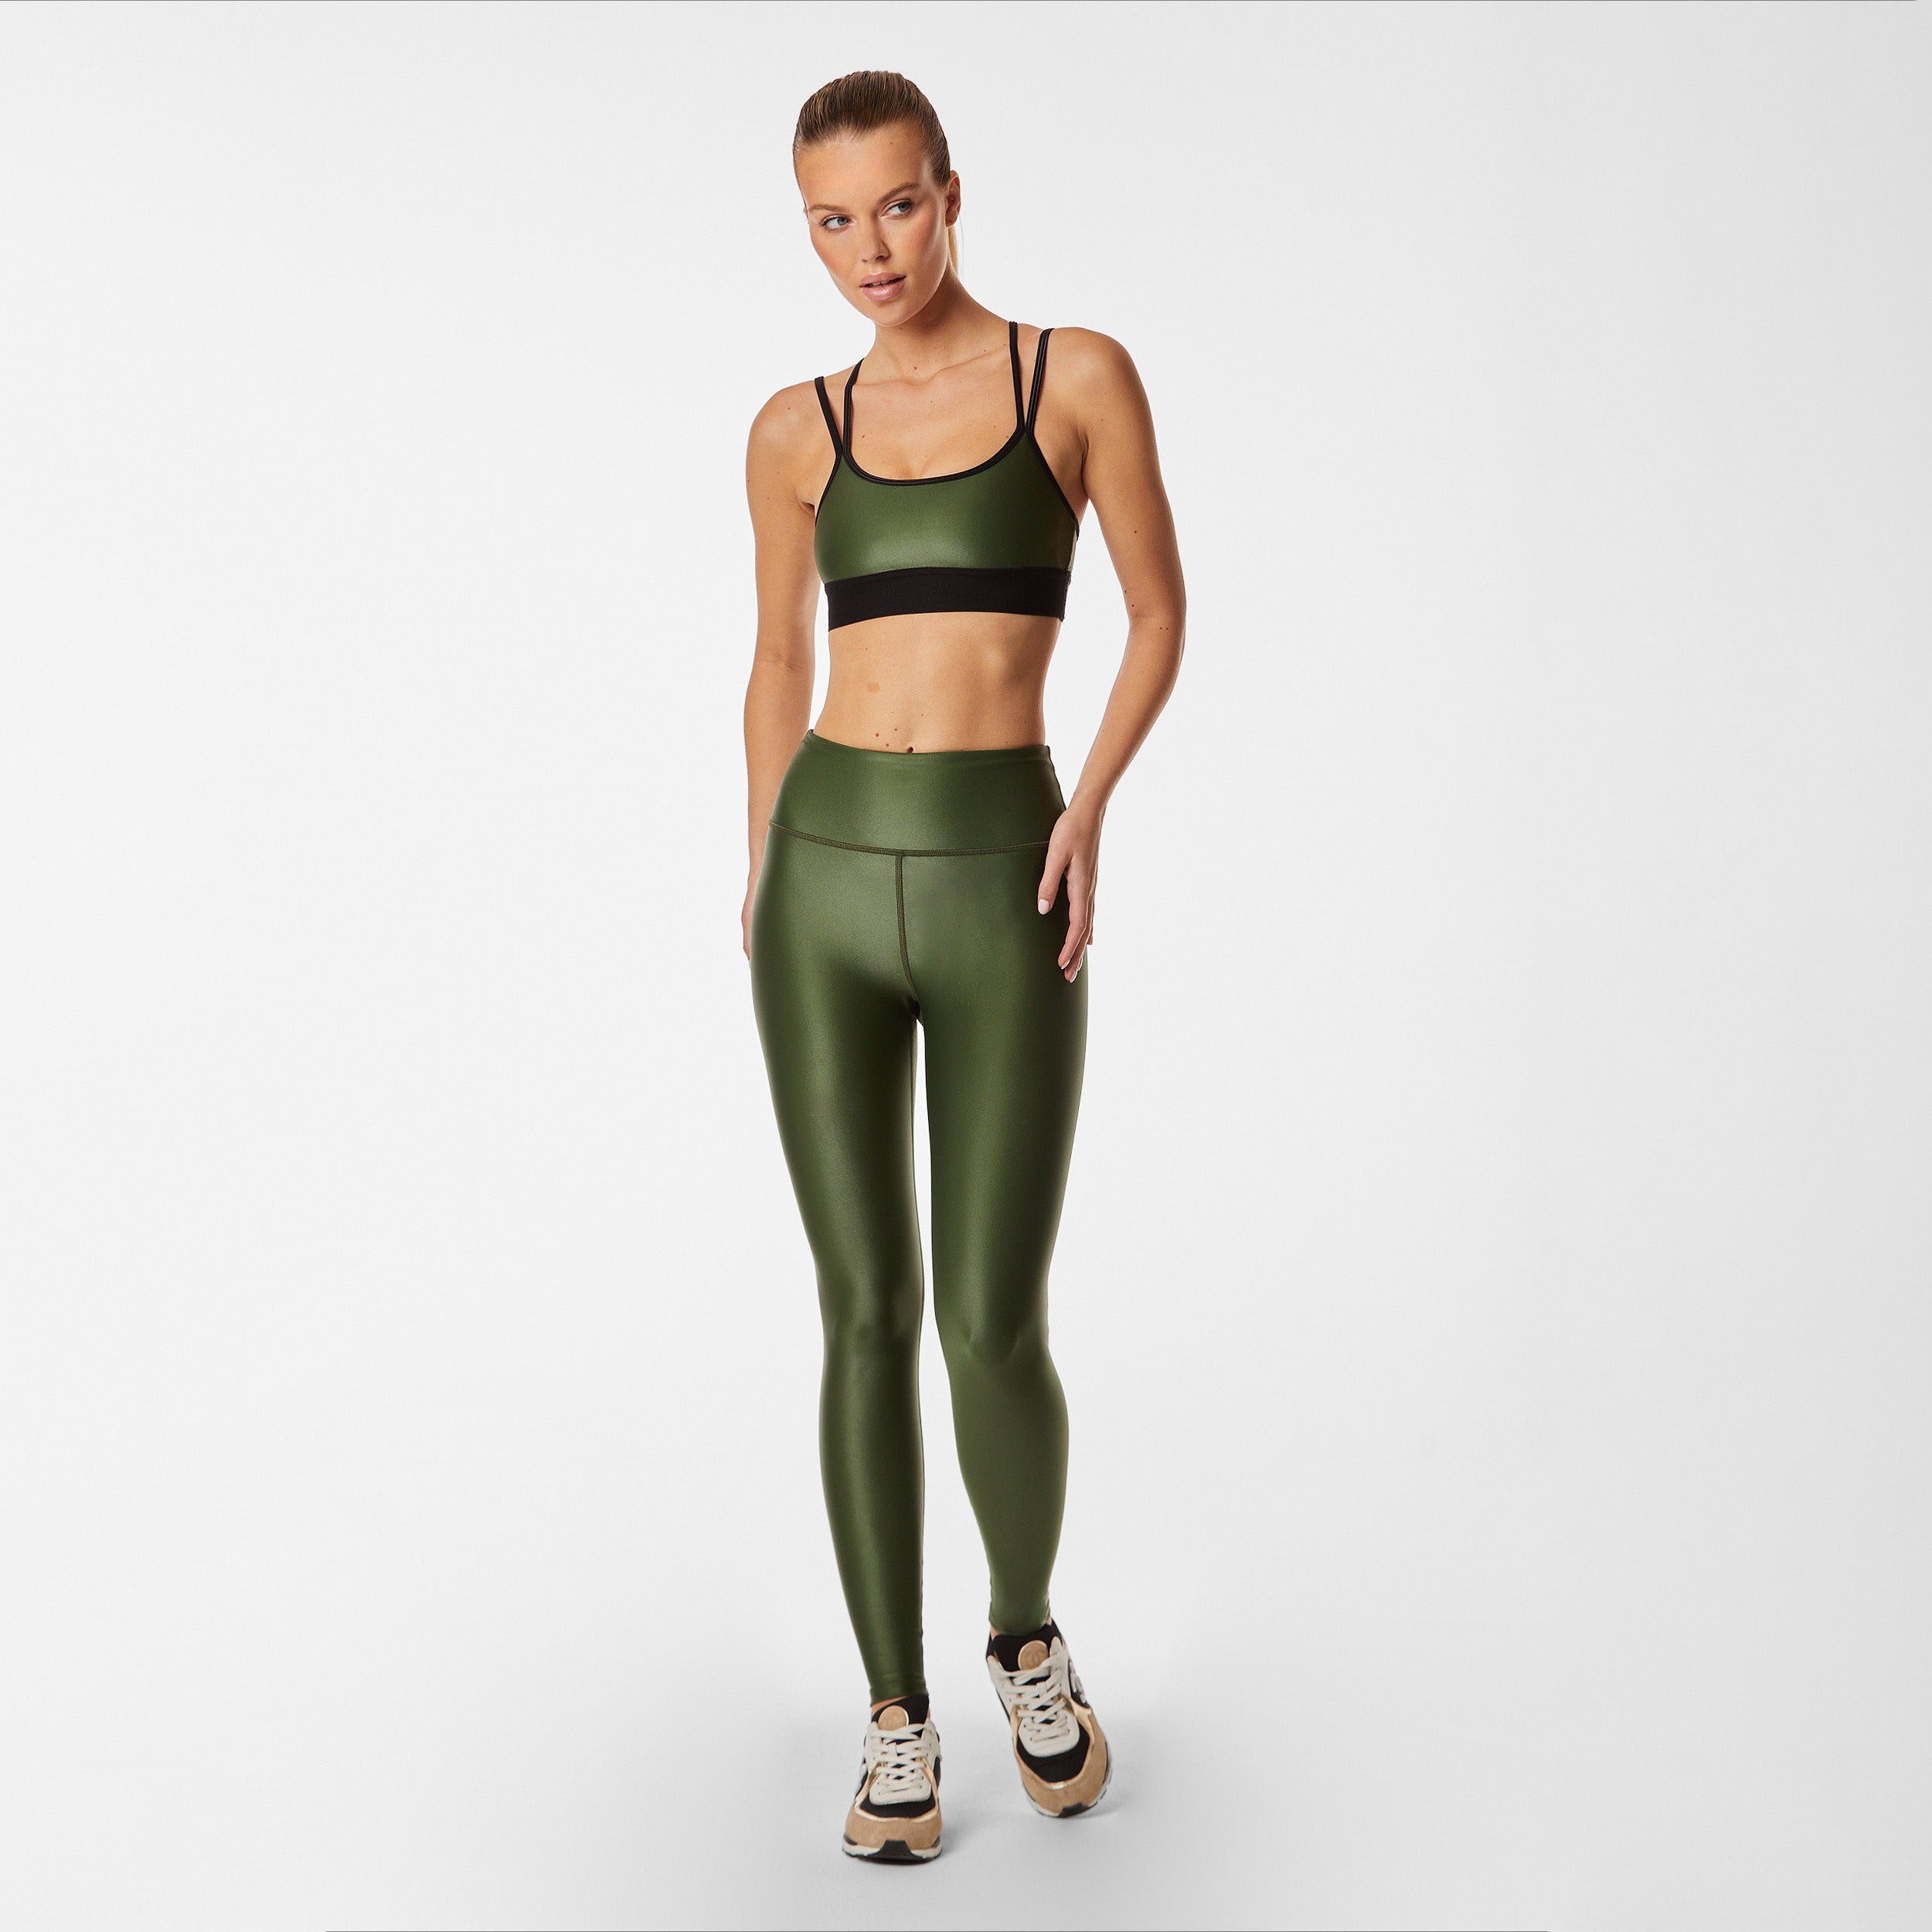 Full body view of woman wearing hunter green gloss liquid sports bra featuring a scoop neckline and an alluring strappy back with a supportive elastic band